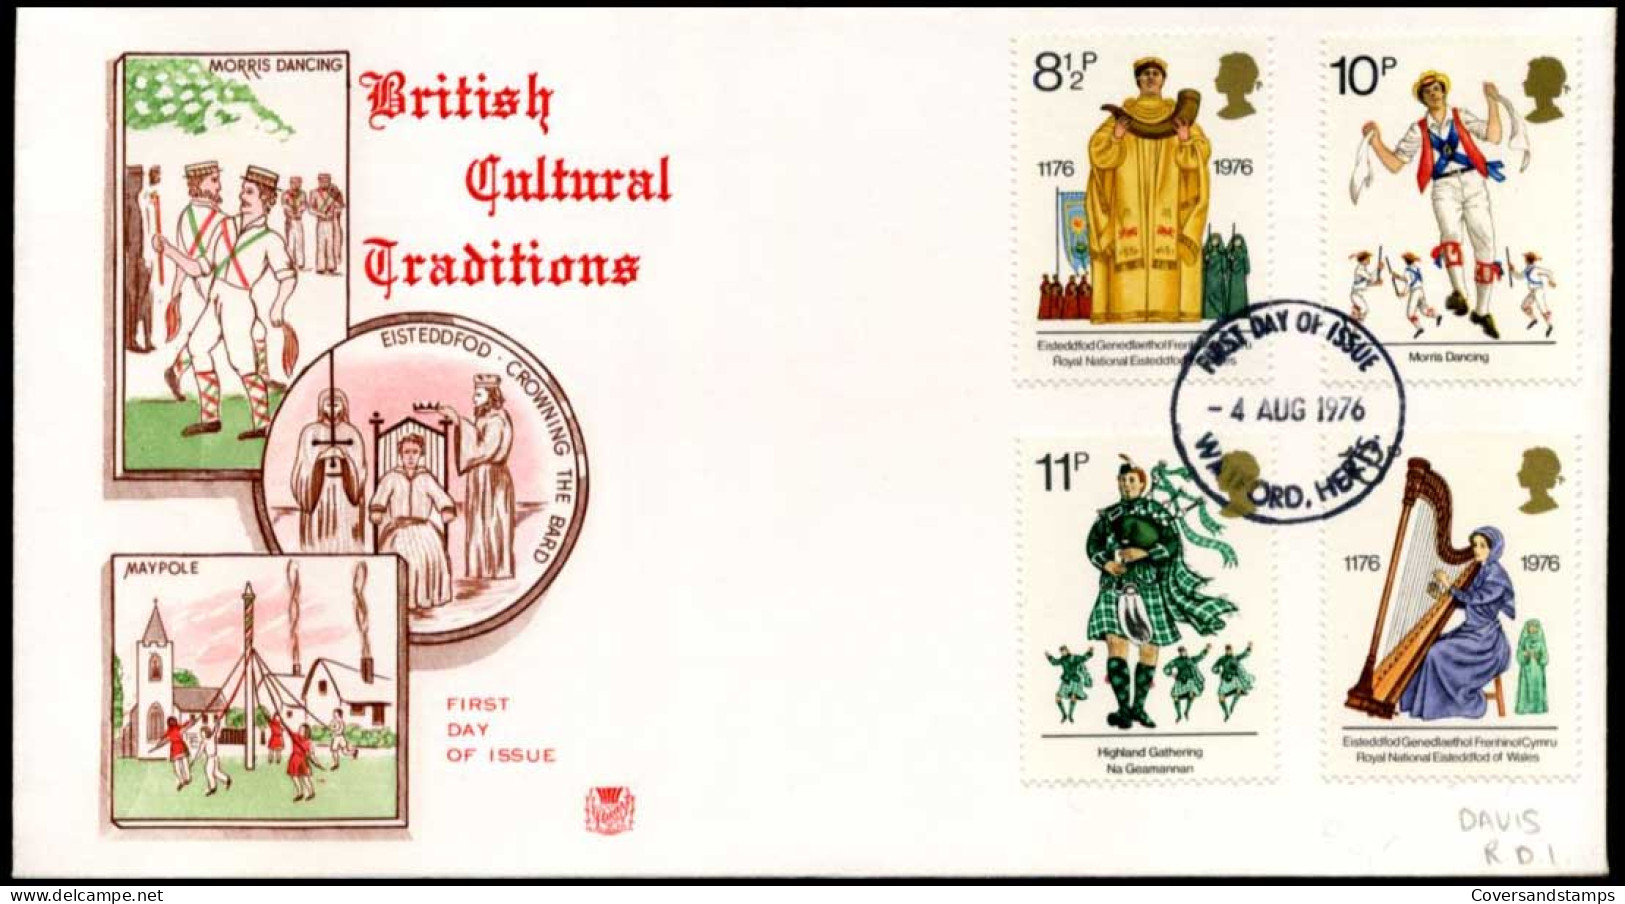 Great-Britain - FDC - British Cultural Traditions - 1971-1980 Decimal Issues